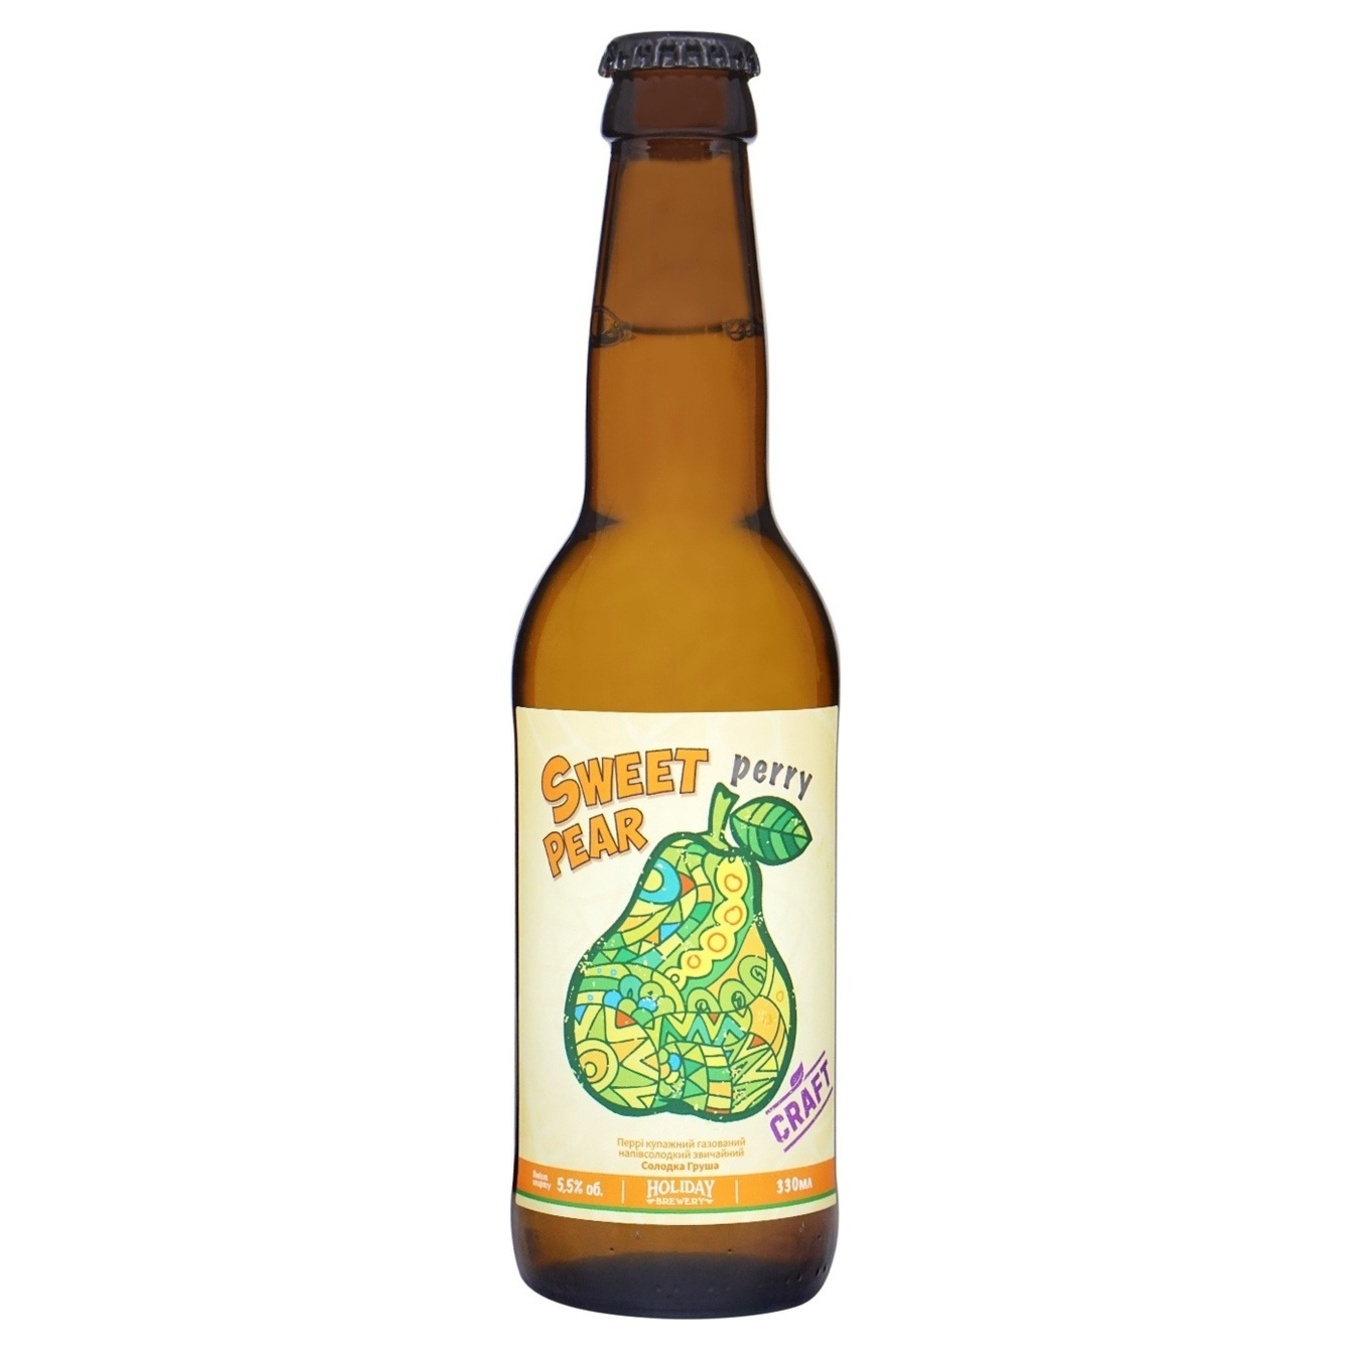 Semi-sweet cider Friday Brewery Sweet Pear Perry 5.5% 0.33l glass bottle